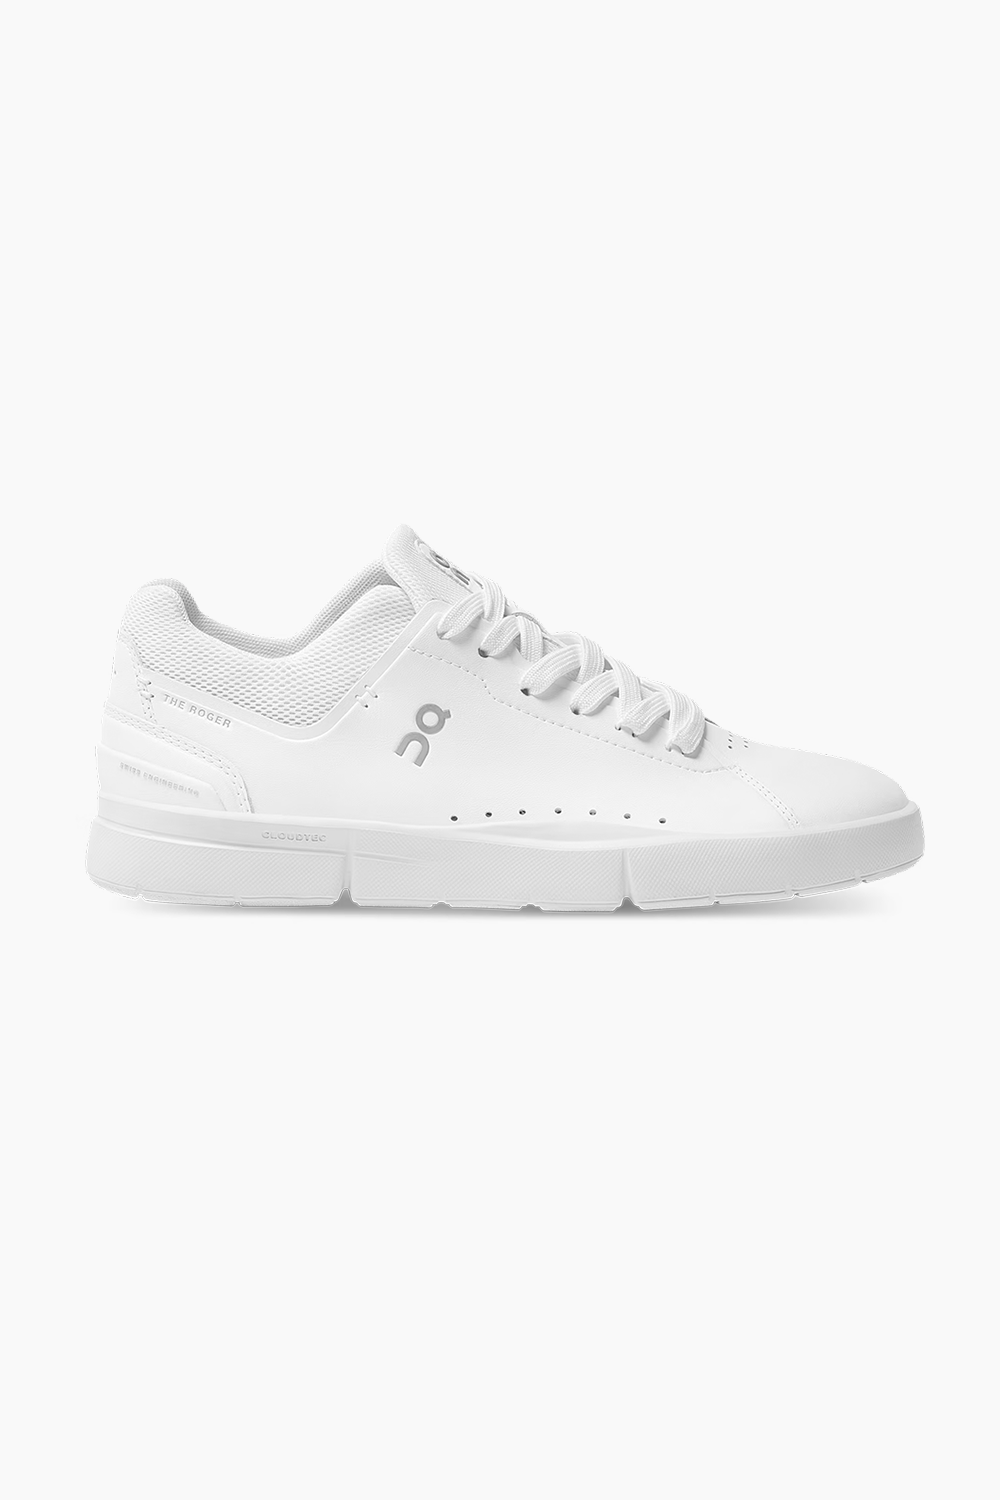 ON | Women's The Roger Advantage in All White